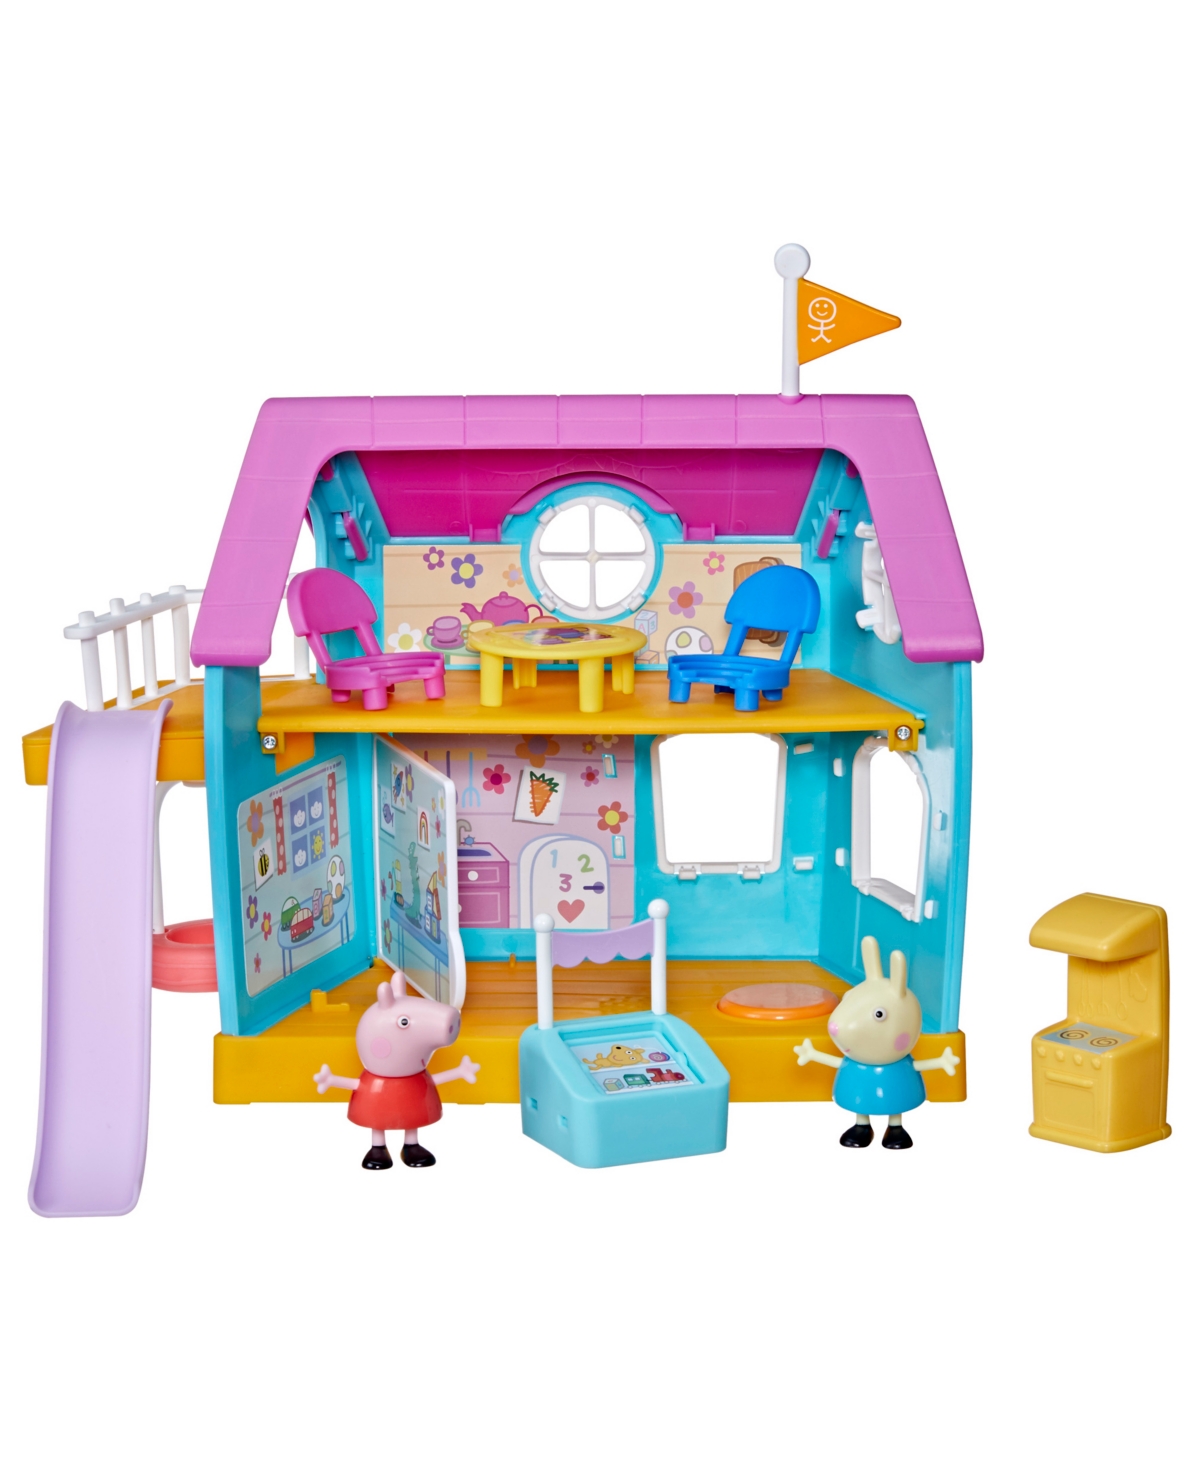 Peppa Pig Peppa's Kids-only Clubhouse In No Color